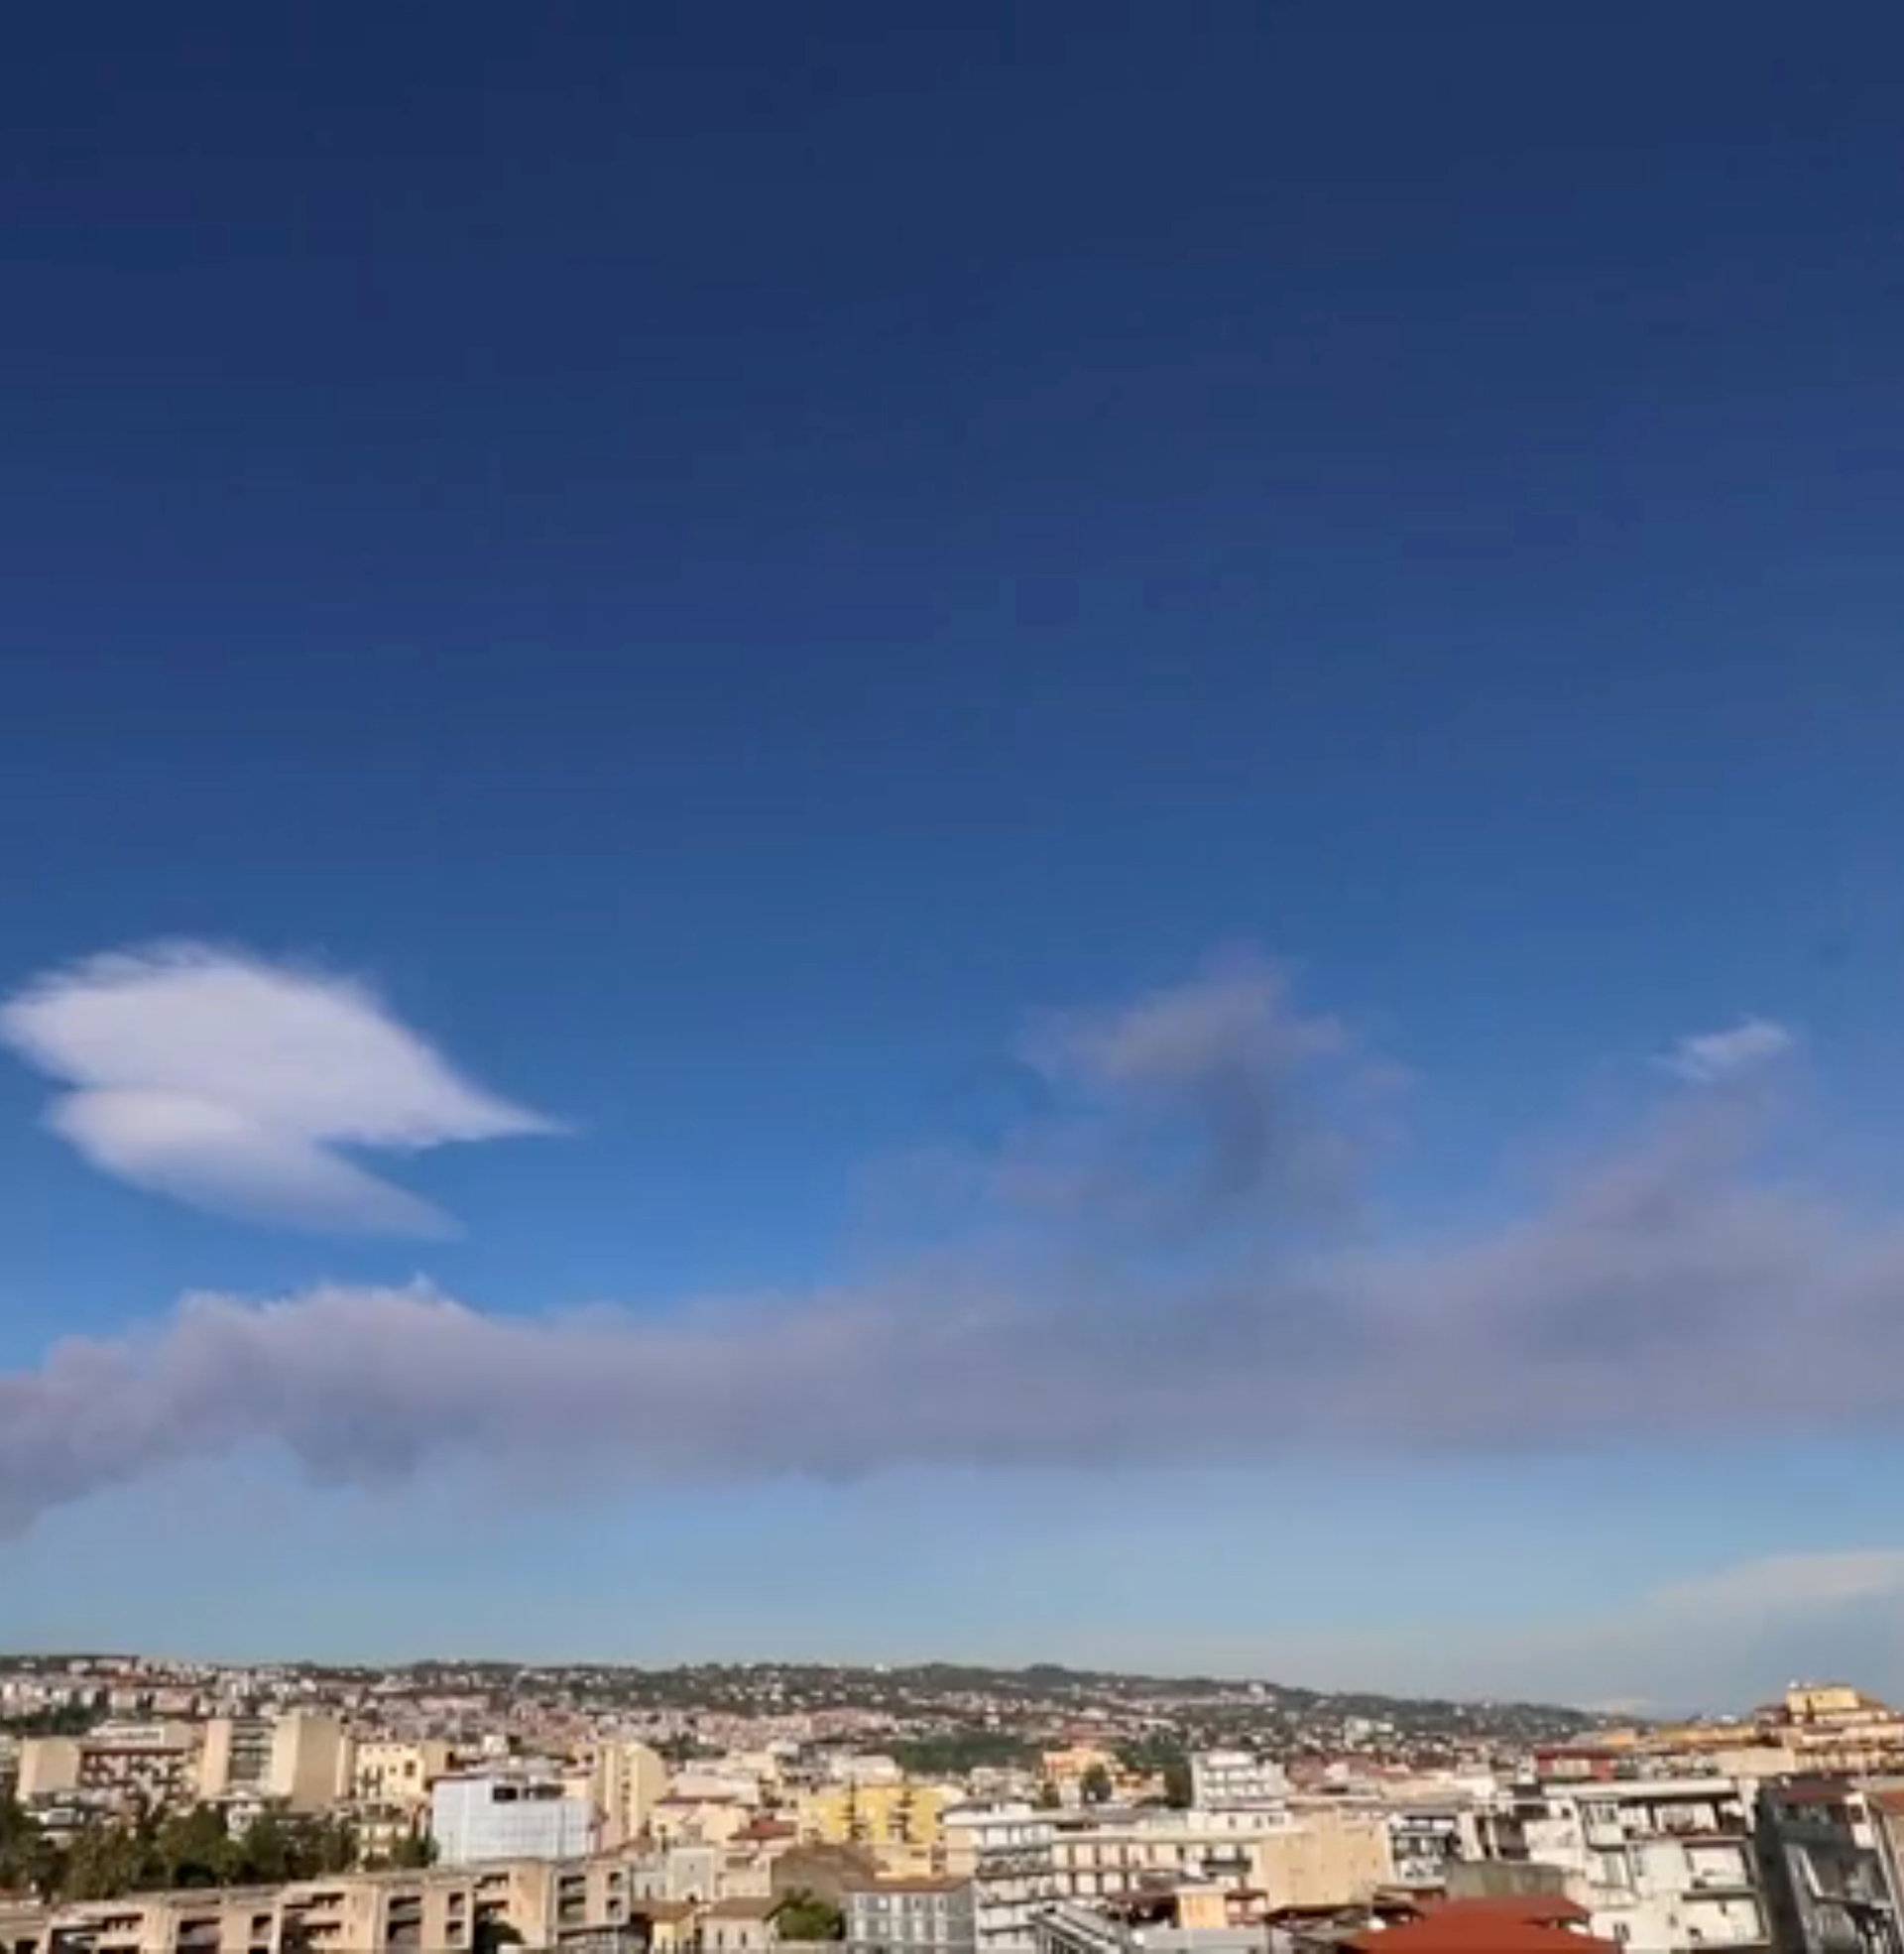 Italy's Mount Etna spews the ash and smoke in Sicily